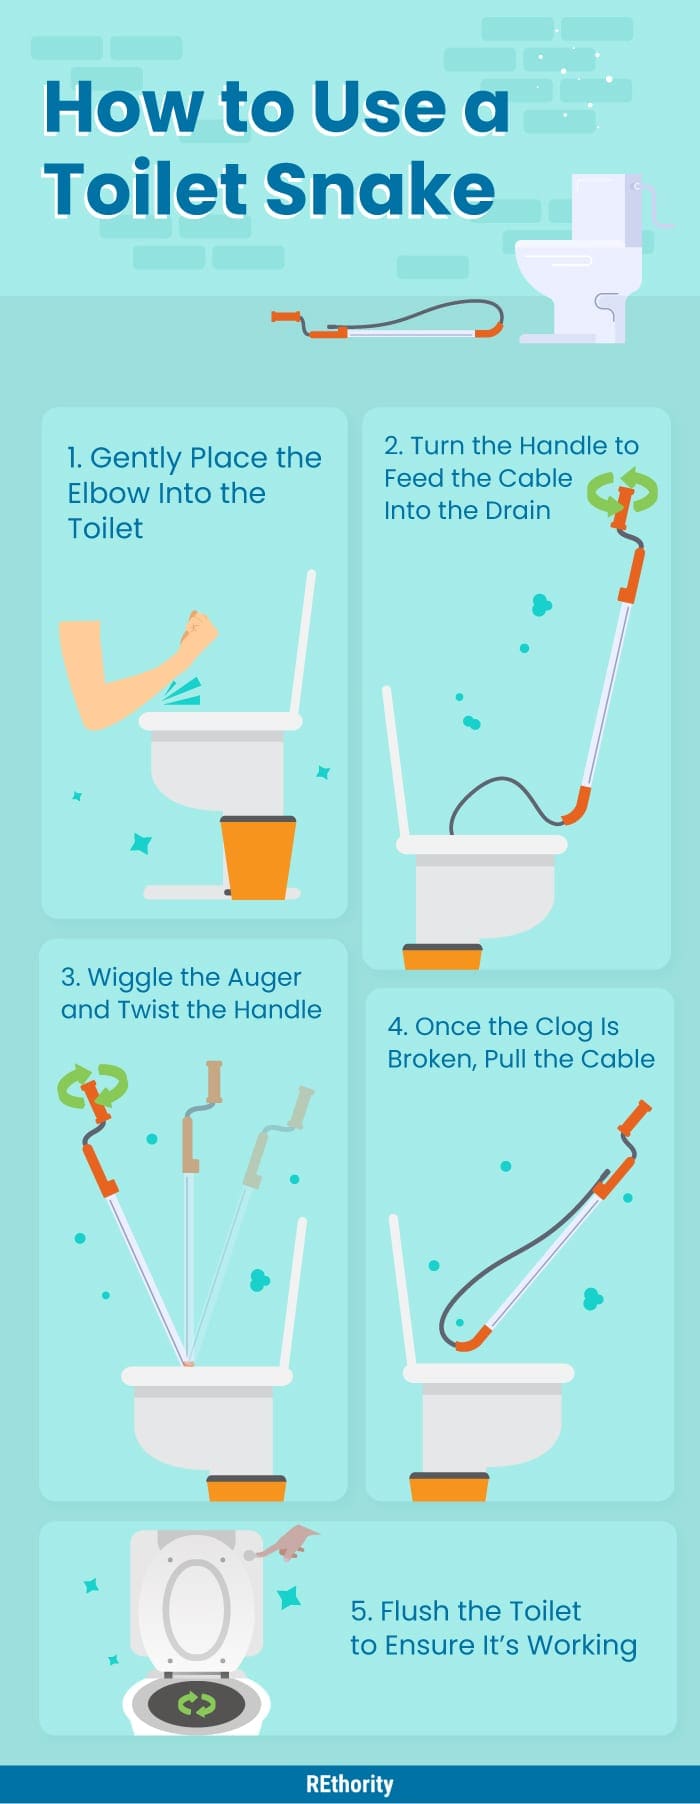 An infographic title How to Use a Toilet Snake to show how to unclog a toilet with this apparatus